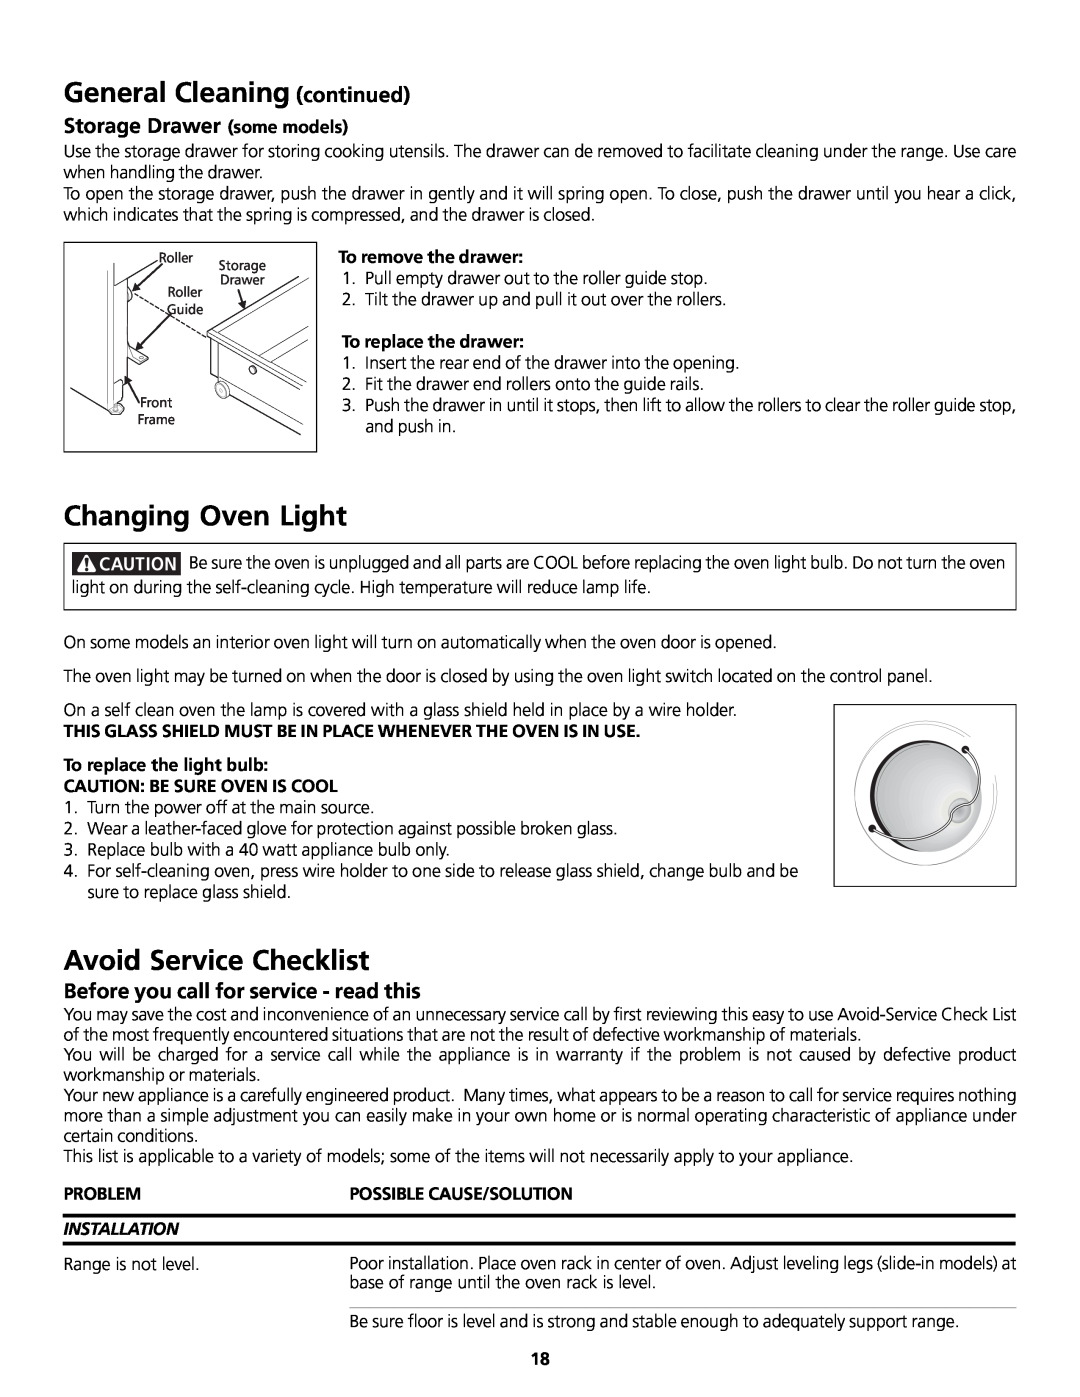 Frigidaire 318200858 Changing Oven Light, Avoid Service Checklist, Storage Drawer some models, To remove the drawer 